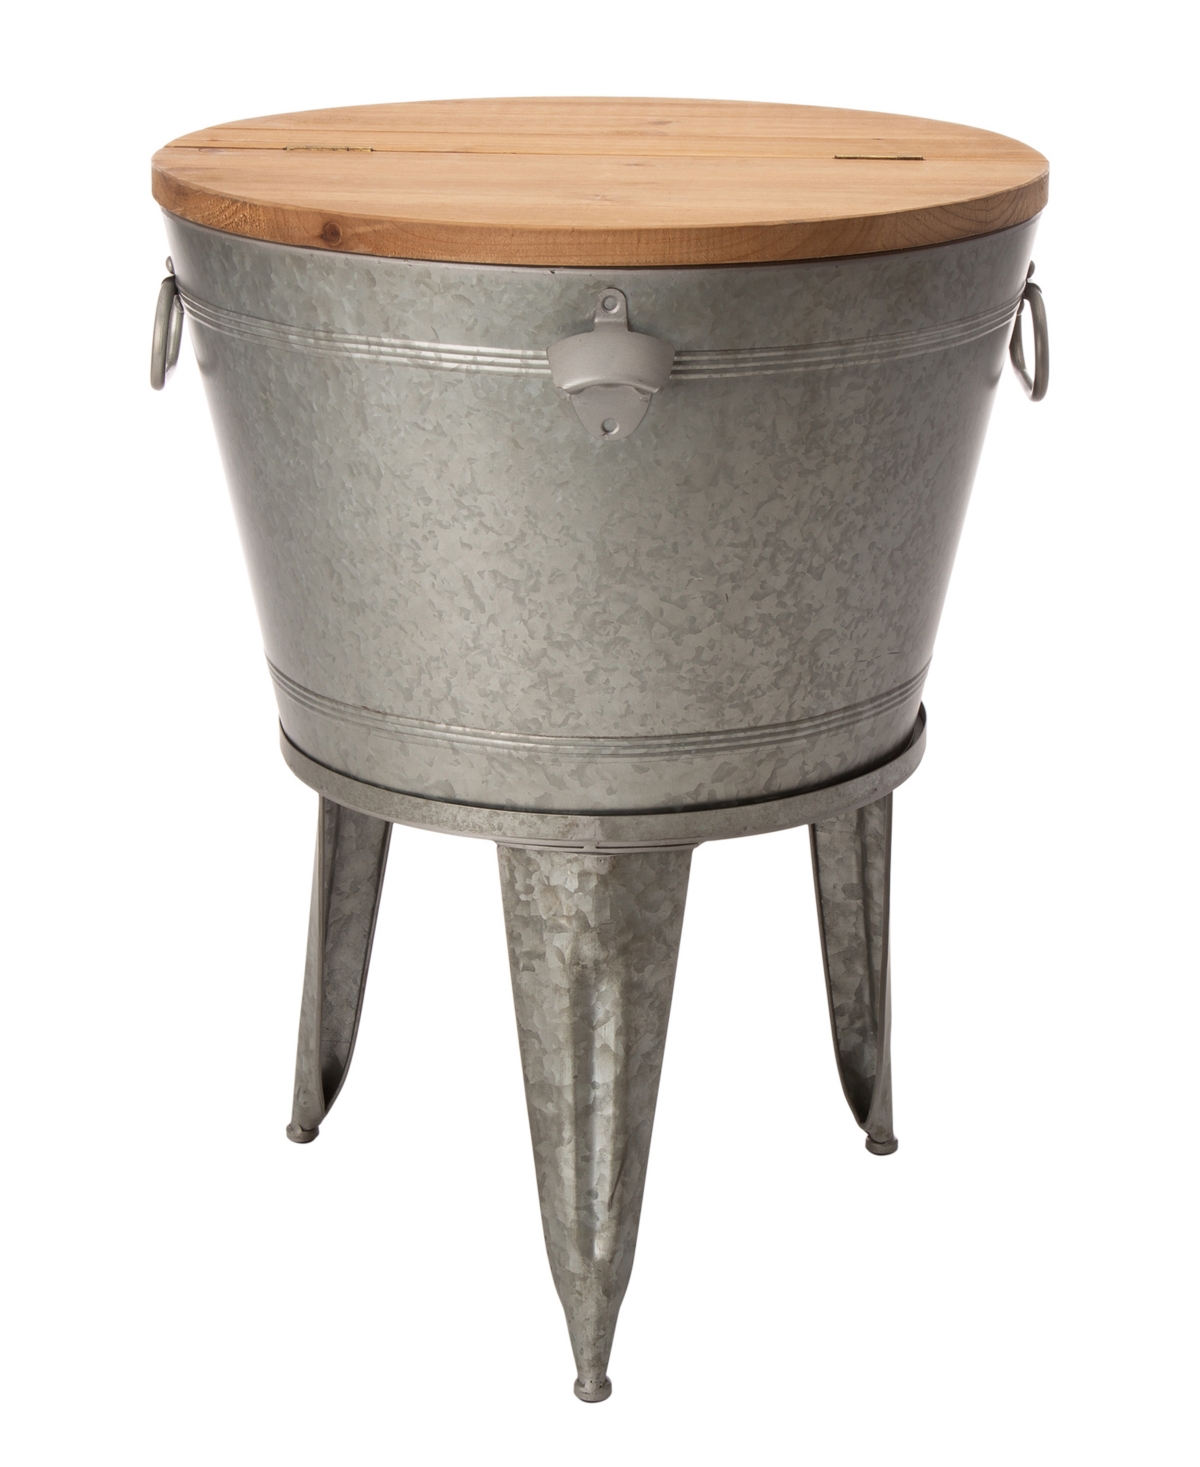 Glitzhome 26.29"h Galvanized Beverage Tub With Metal Stand Or Accent Table With Firwood Lid In Silver